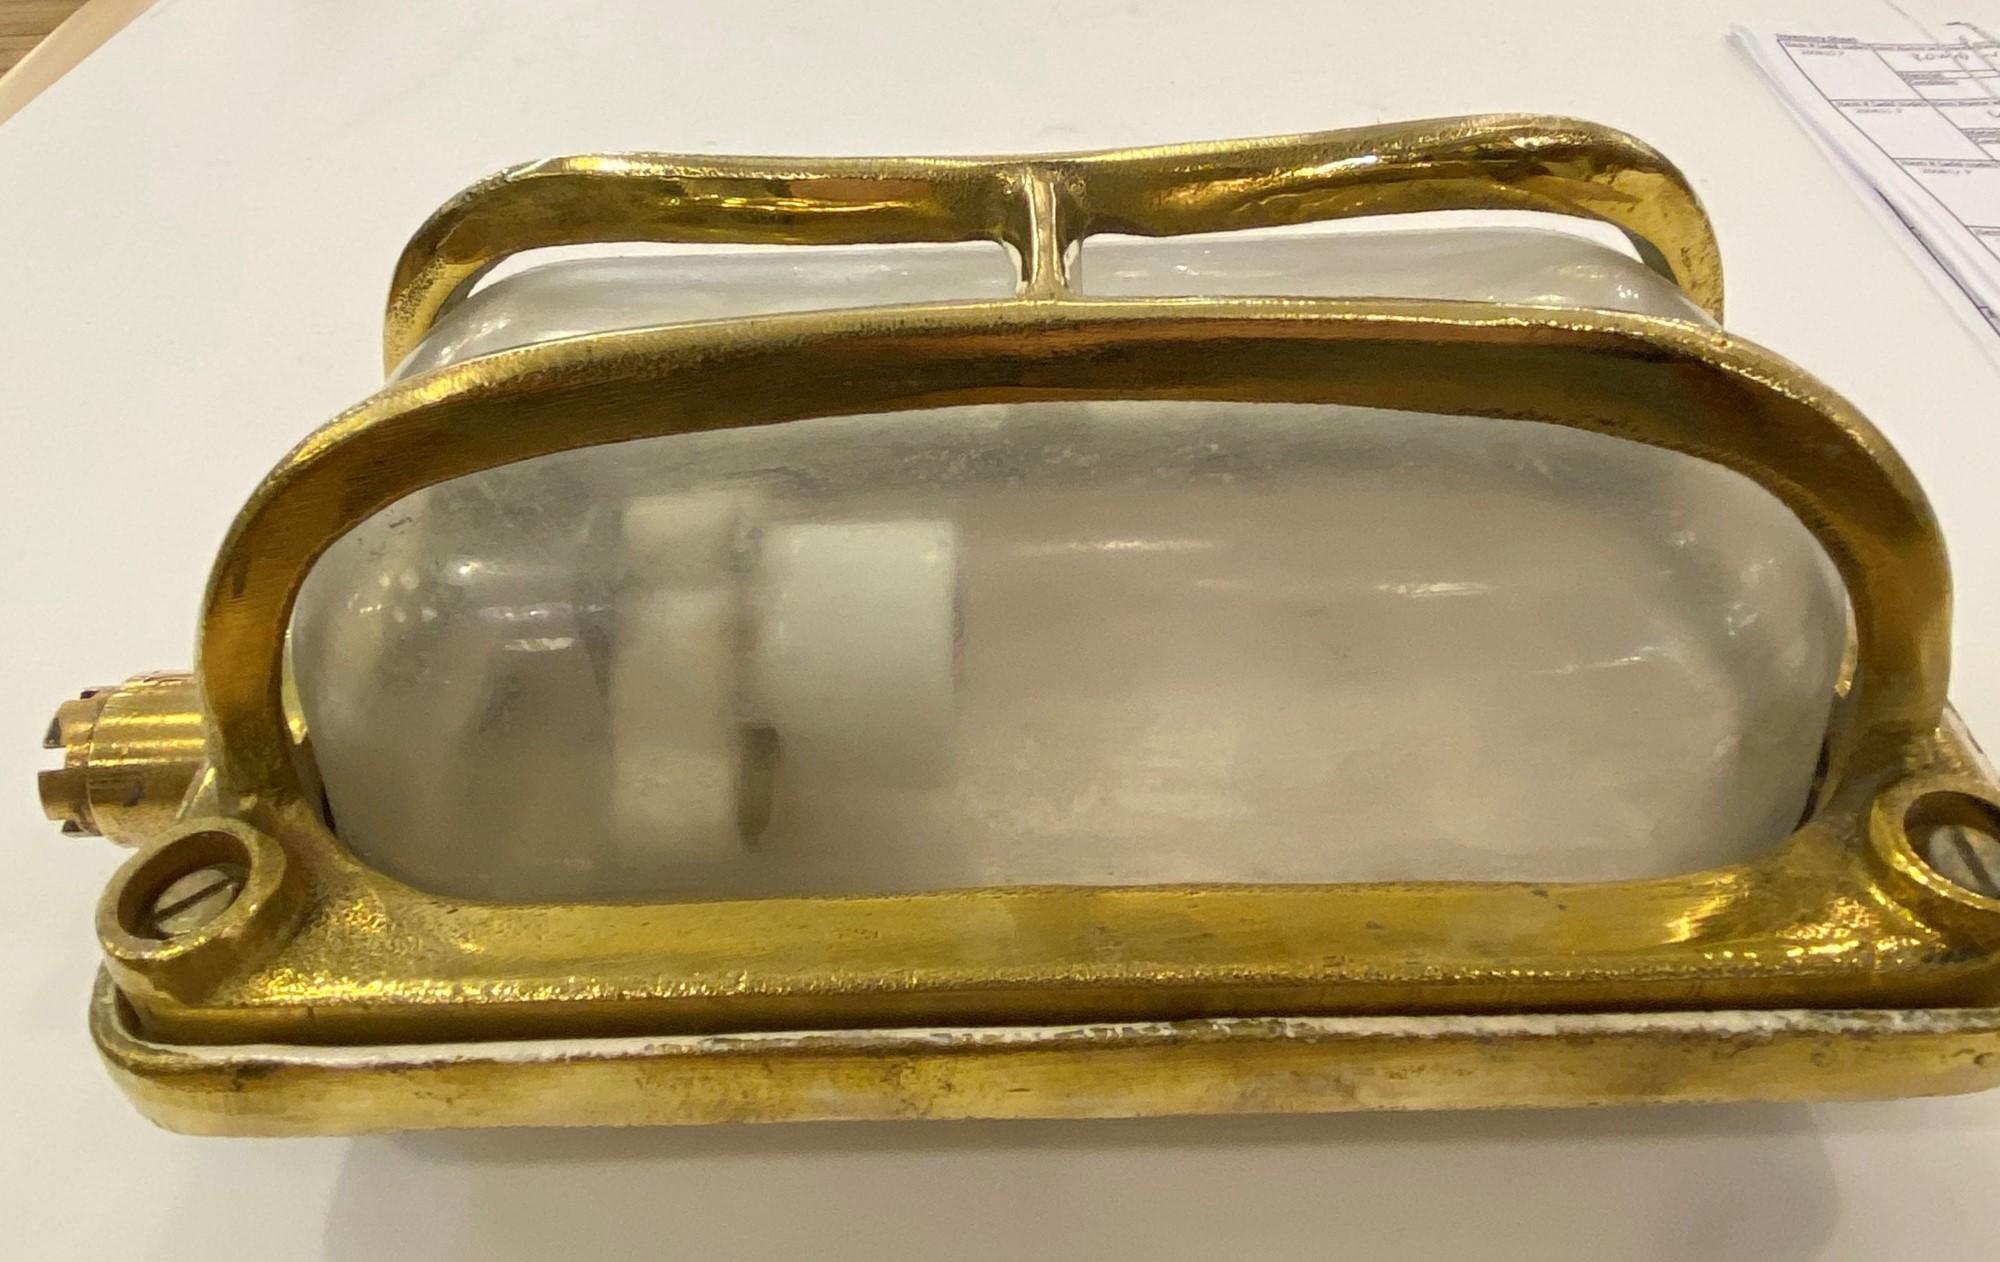 Contemporary Brass Nautical Ship Sconce Light Rectangular Qty Available Bulkhead Style For Sale